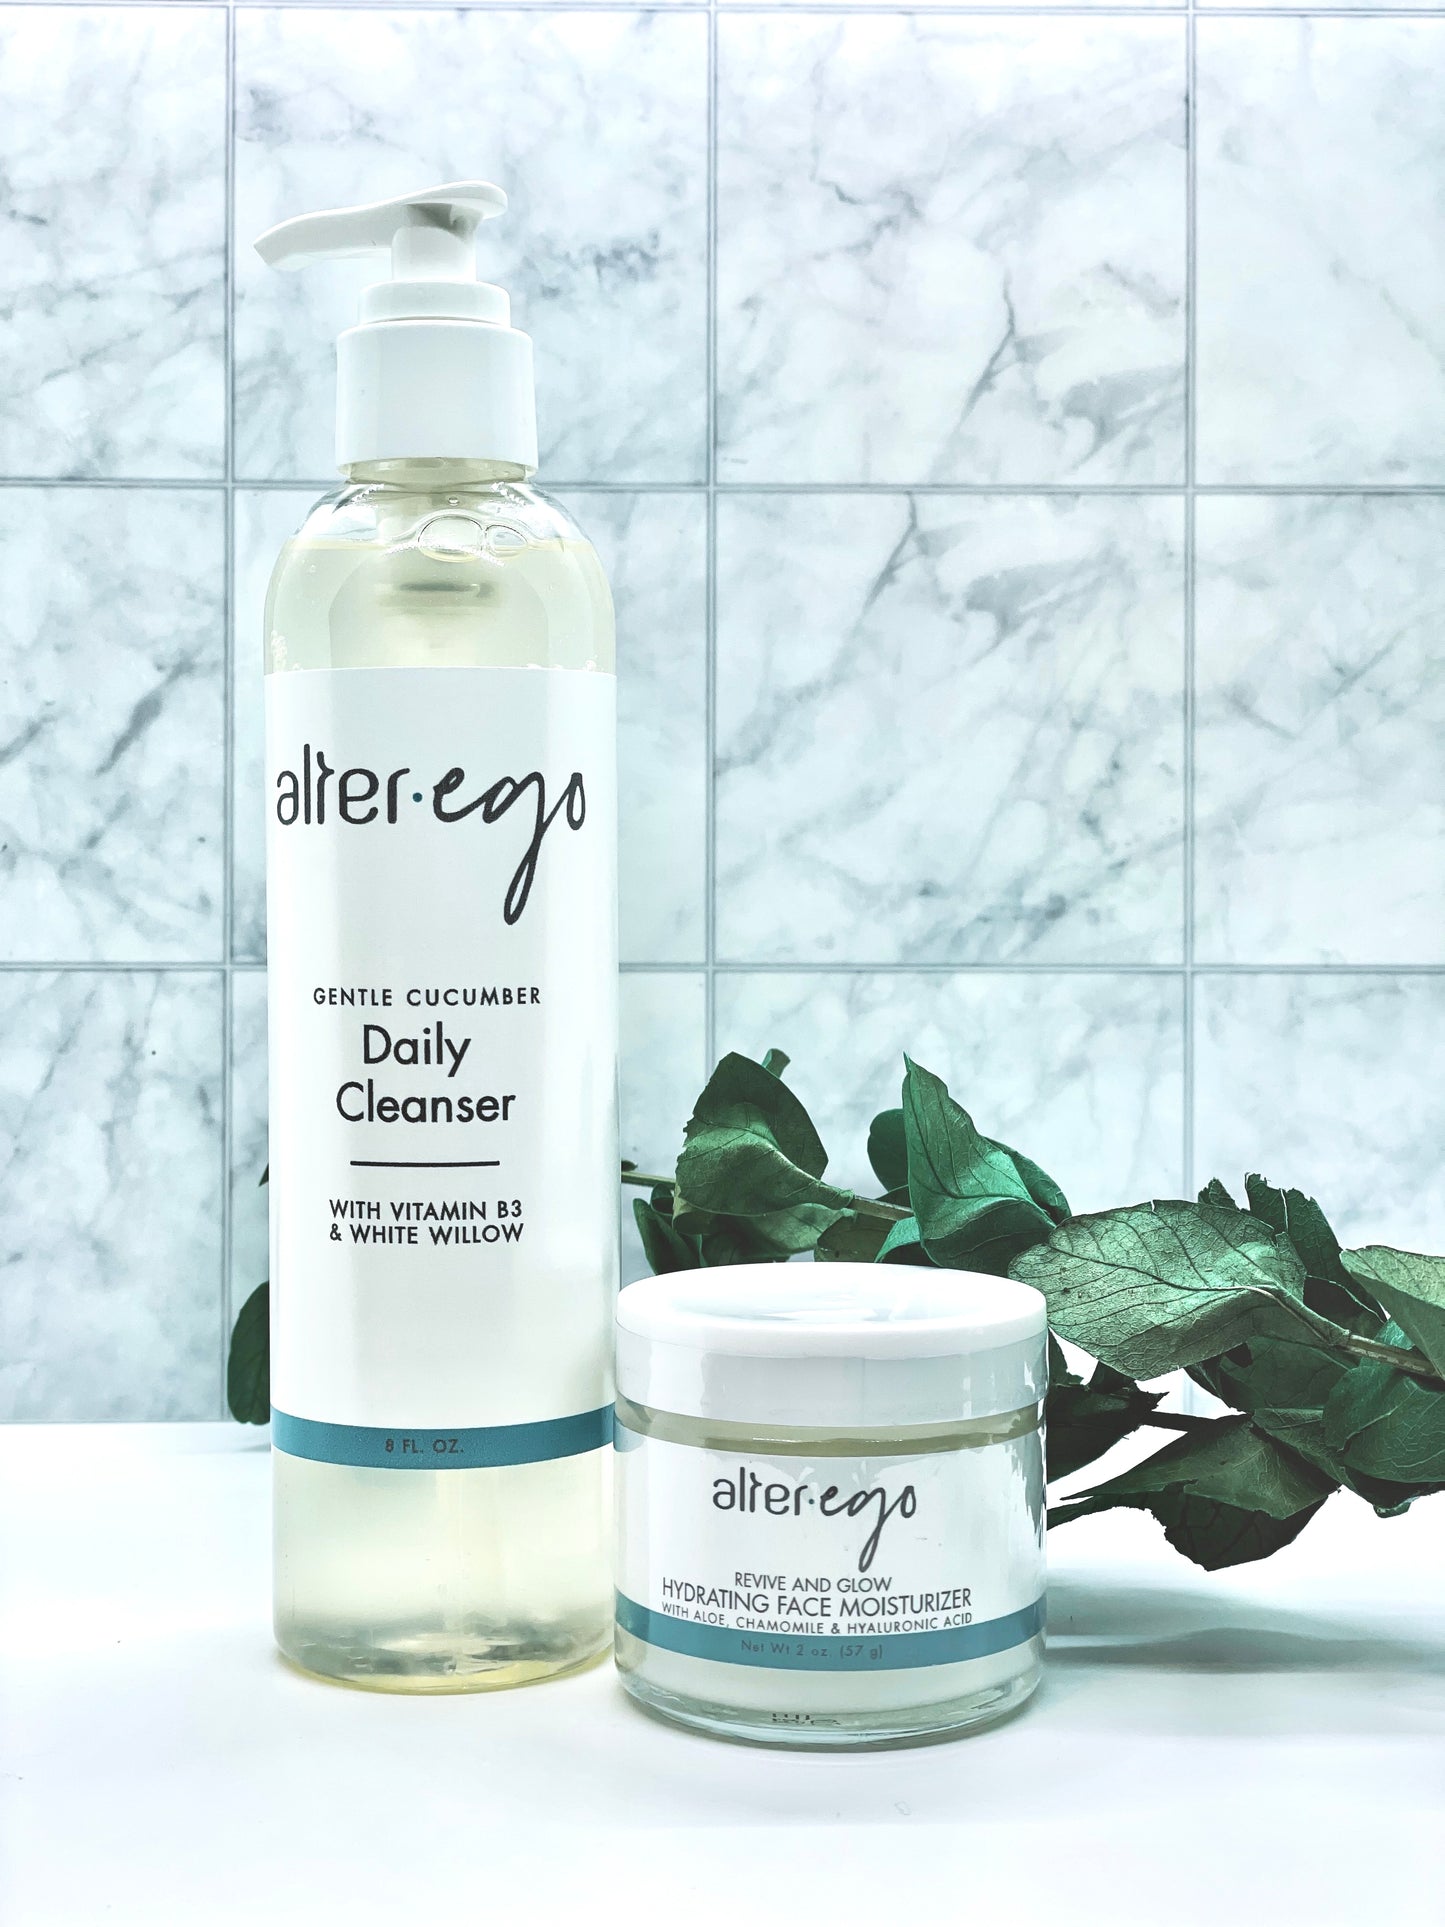 Gentle Cucumber Daily Cleanser with Vitamin B3 & White Willow